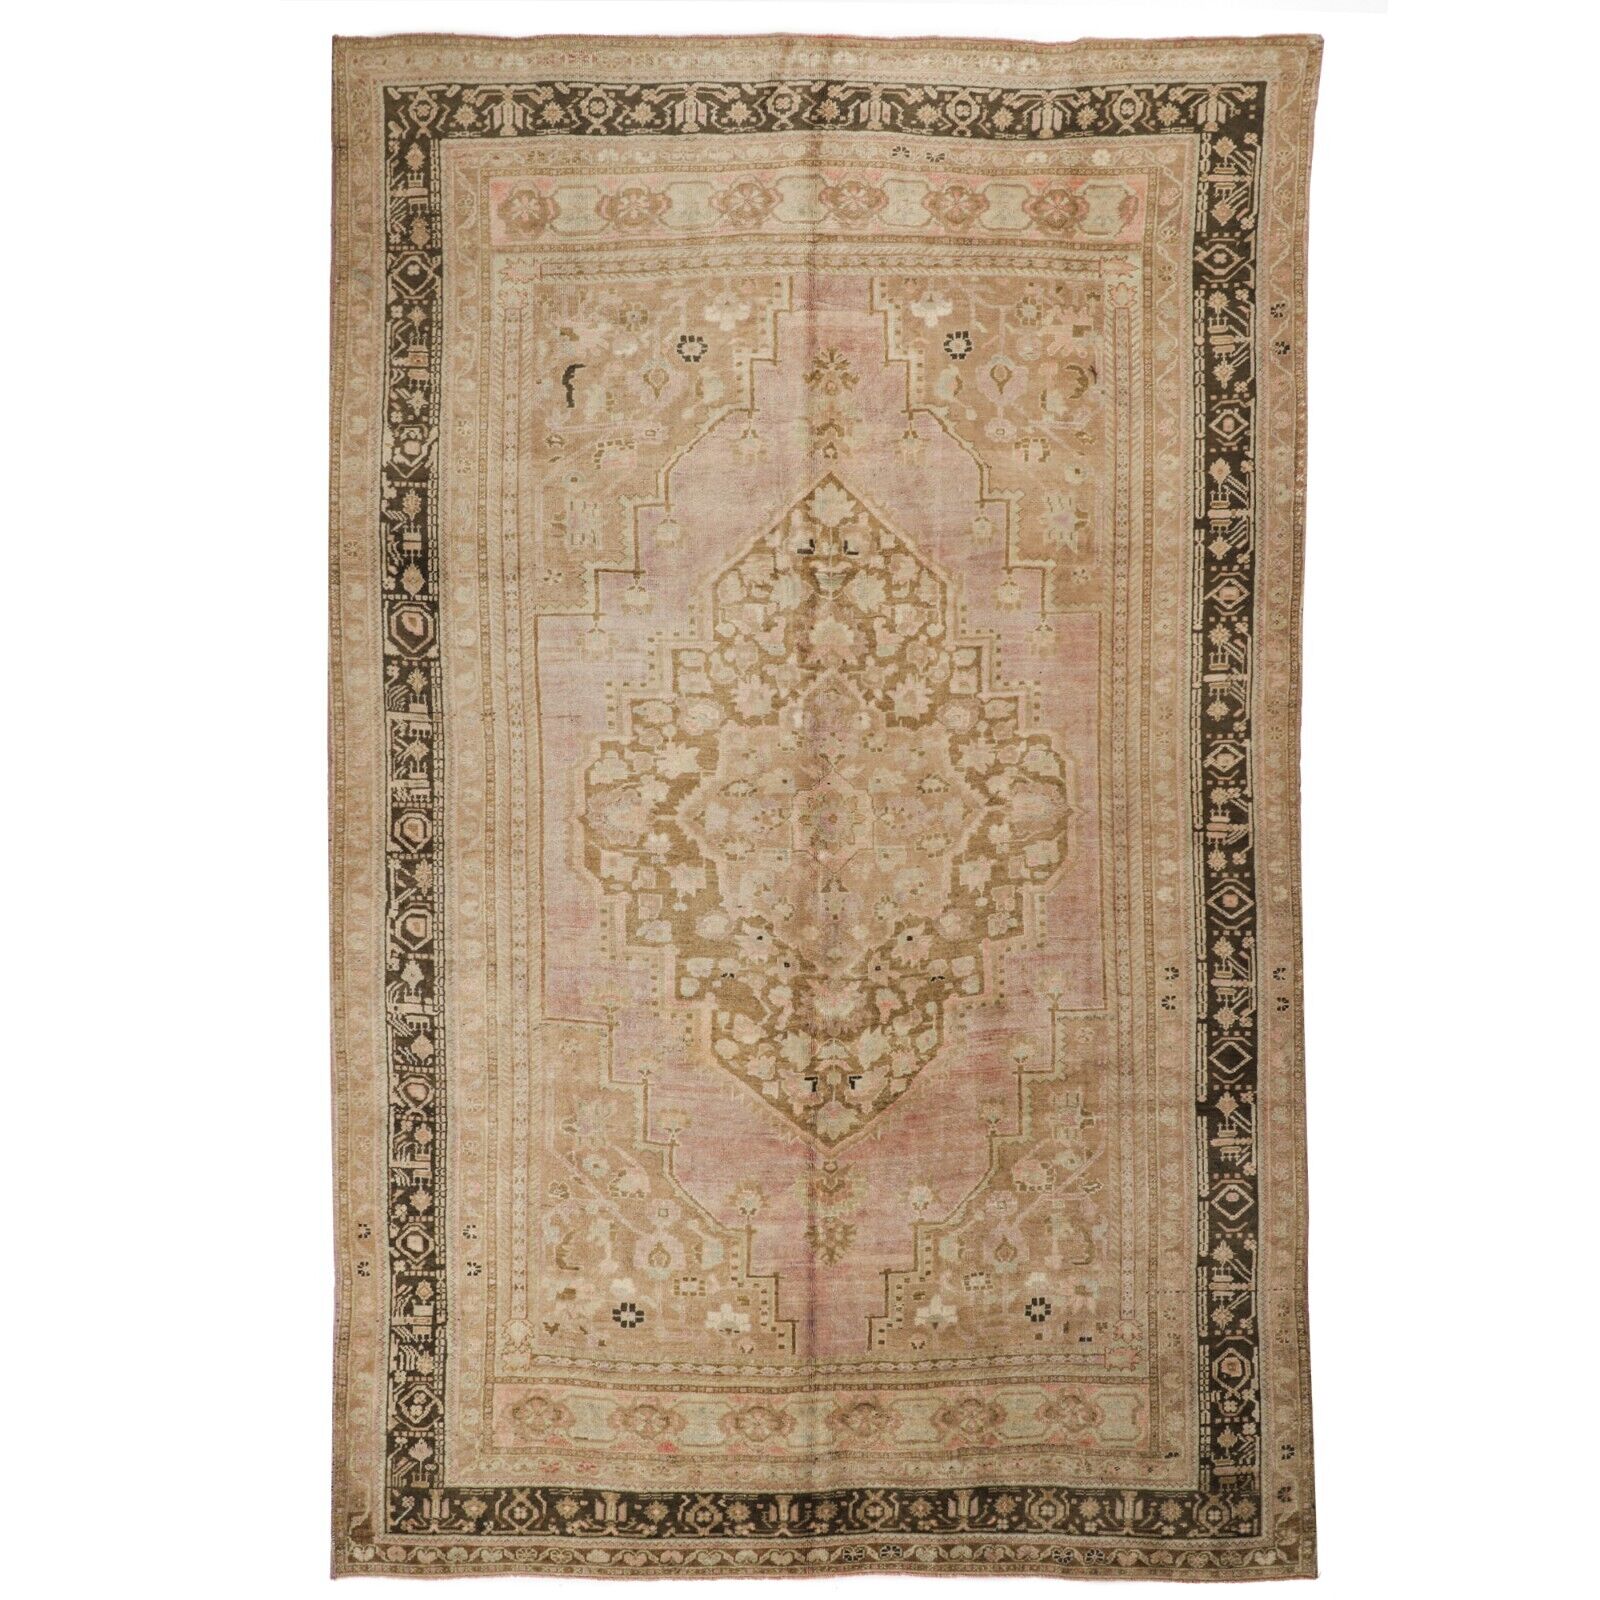 Turkish rug Anatolian pattern very quality rugs for home area rug 11879